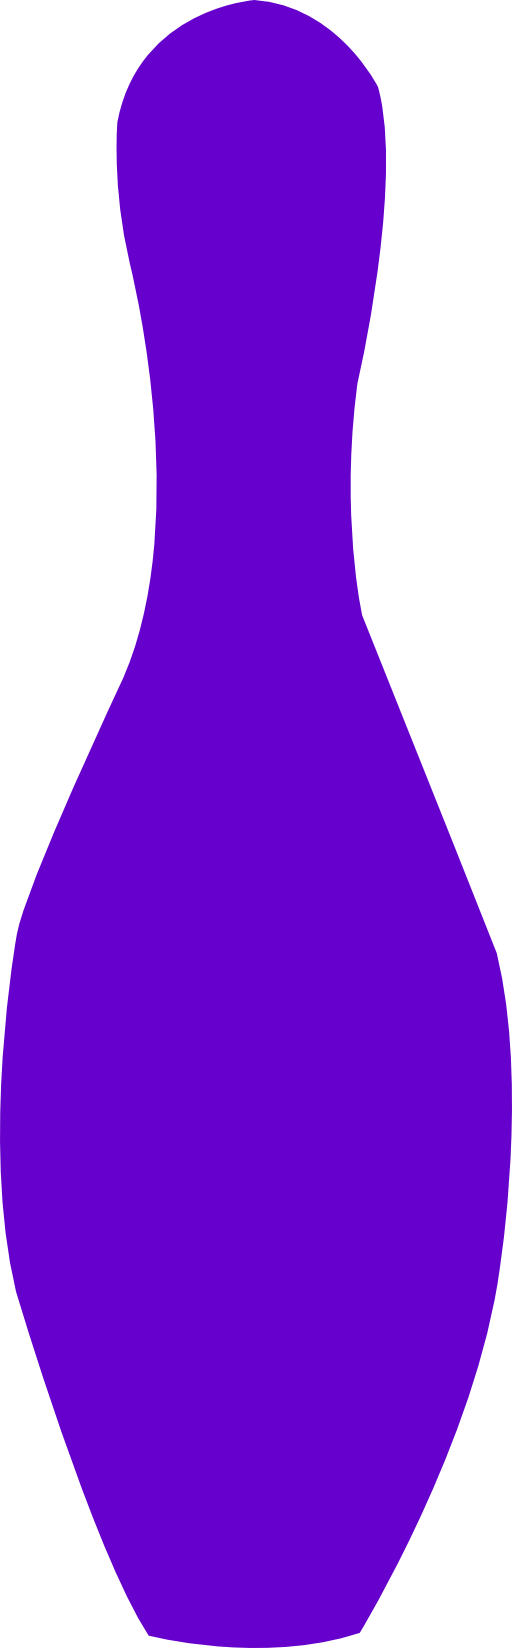 Bowling Pin Opurple Clipart Royalty Free Public ...